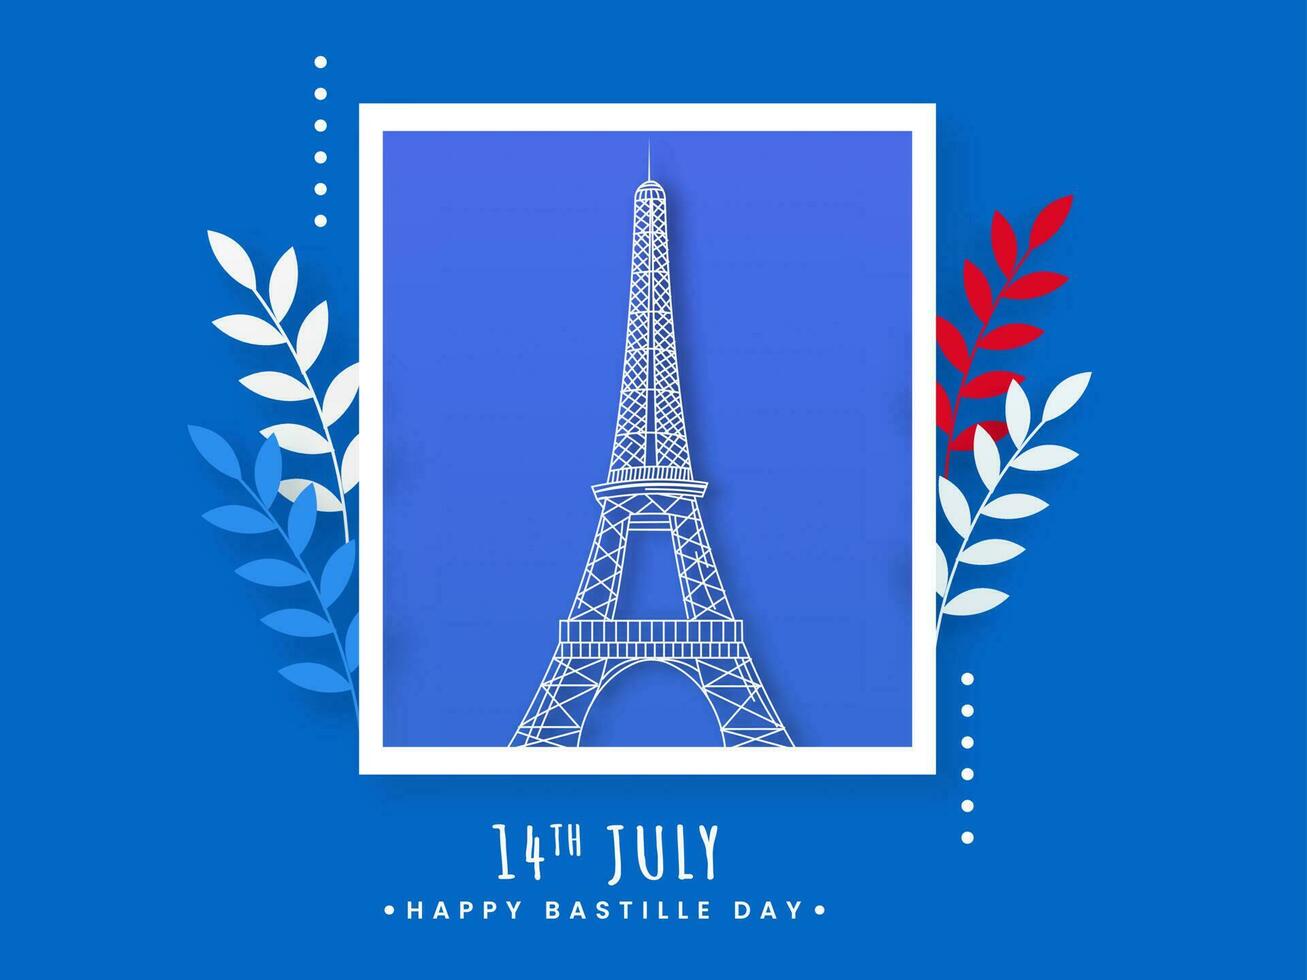 Polaroid Eiffel Tower Image with Leaves on Blue Background for 14th July, Happy Bastille Day. vector